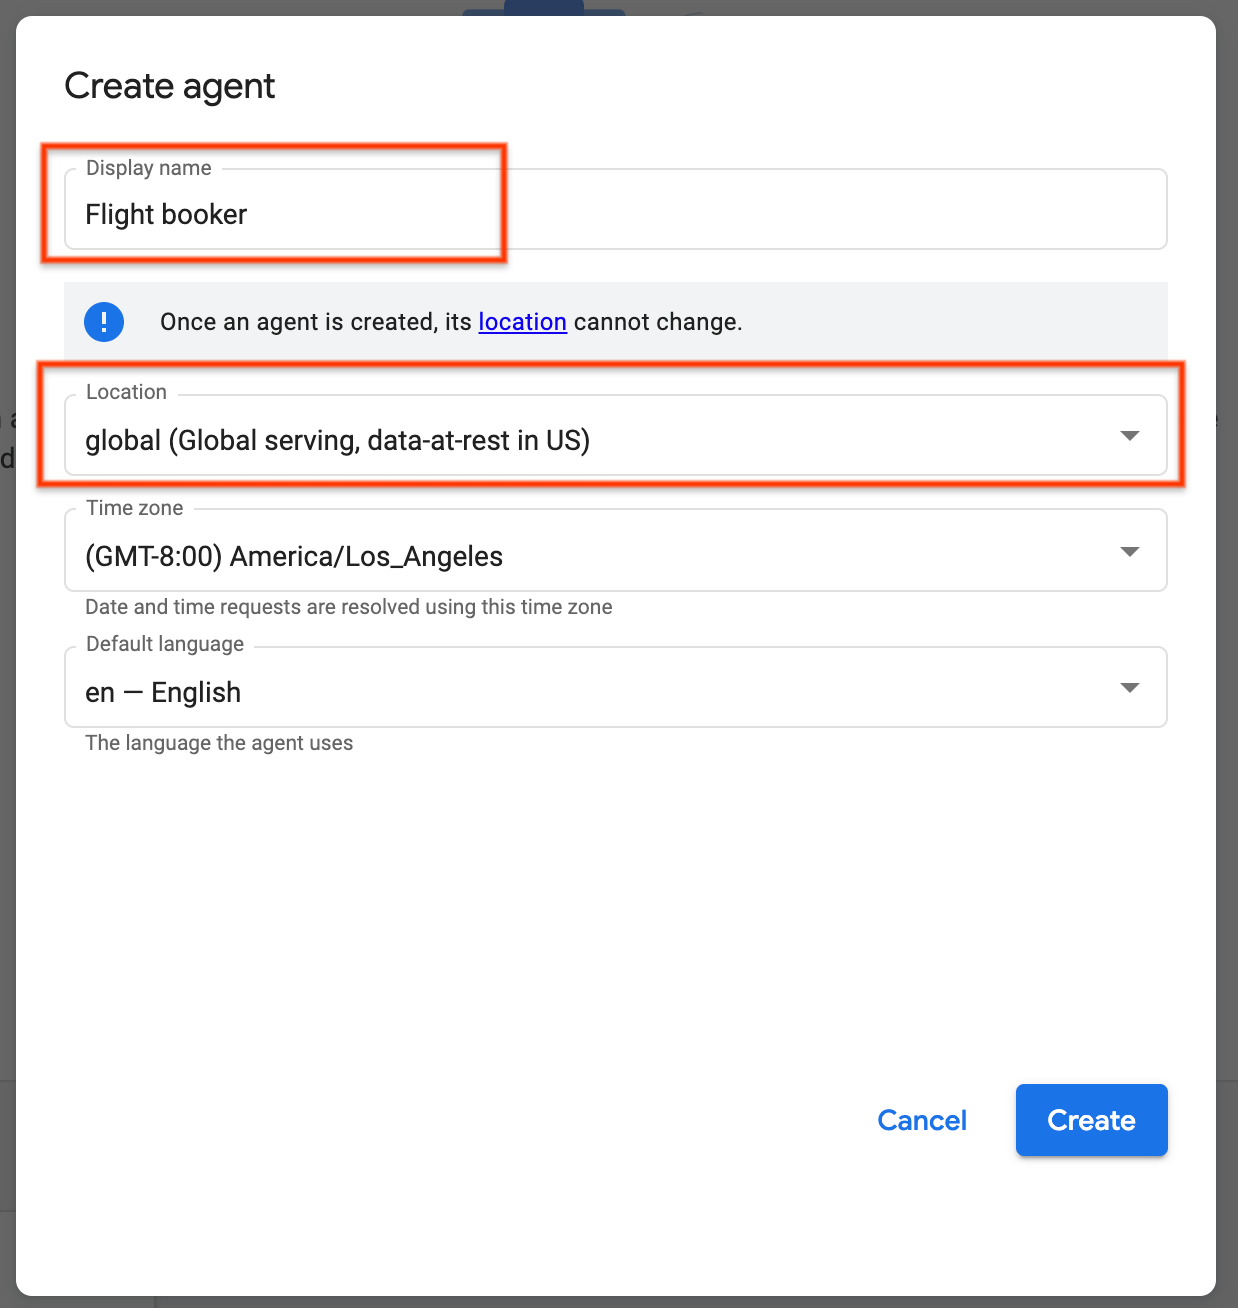 Create agent window, with display name and location fields completed